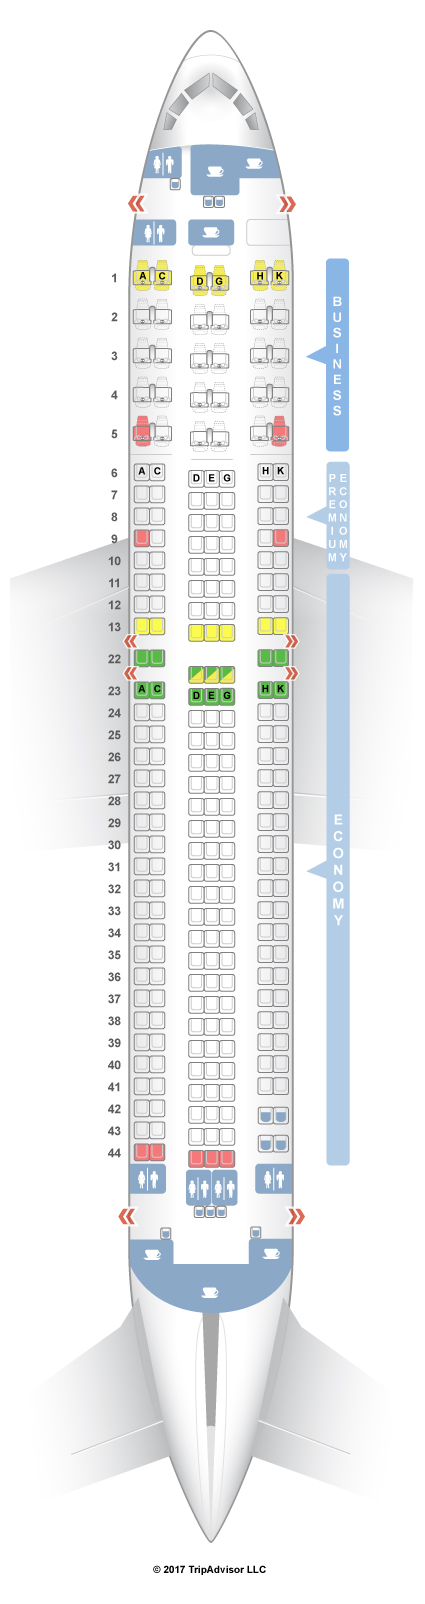 Boeing 767 400 Jet Seating Chart